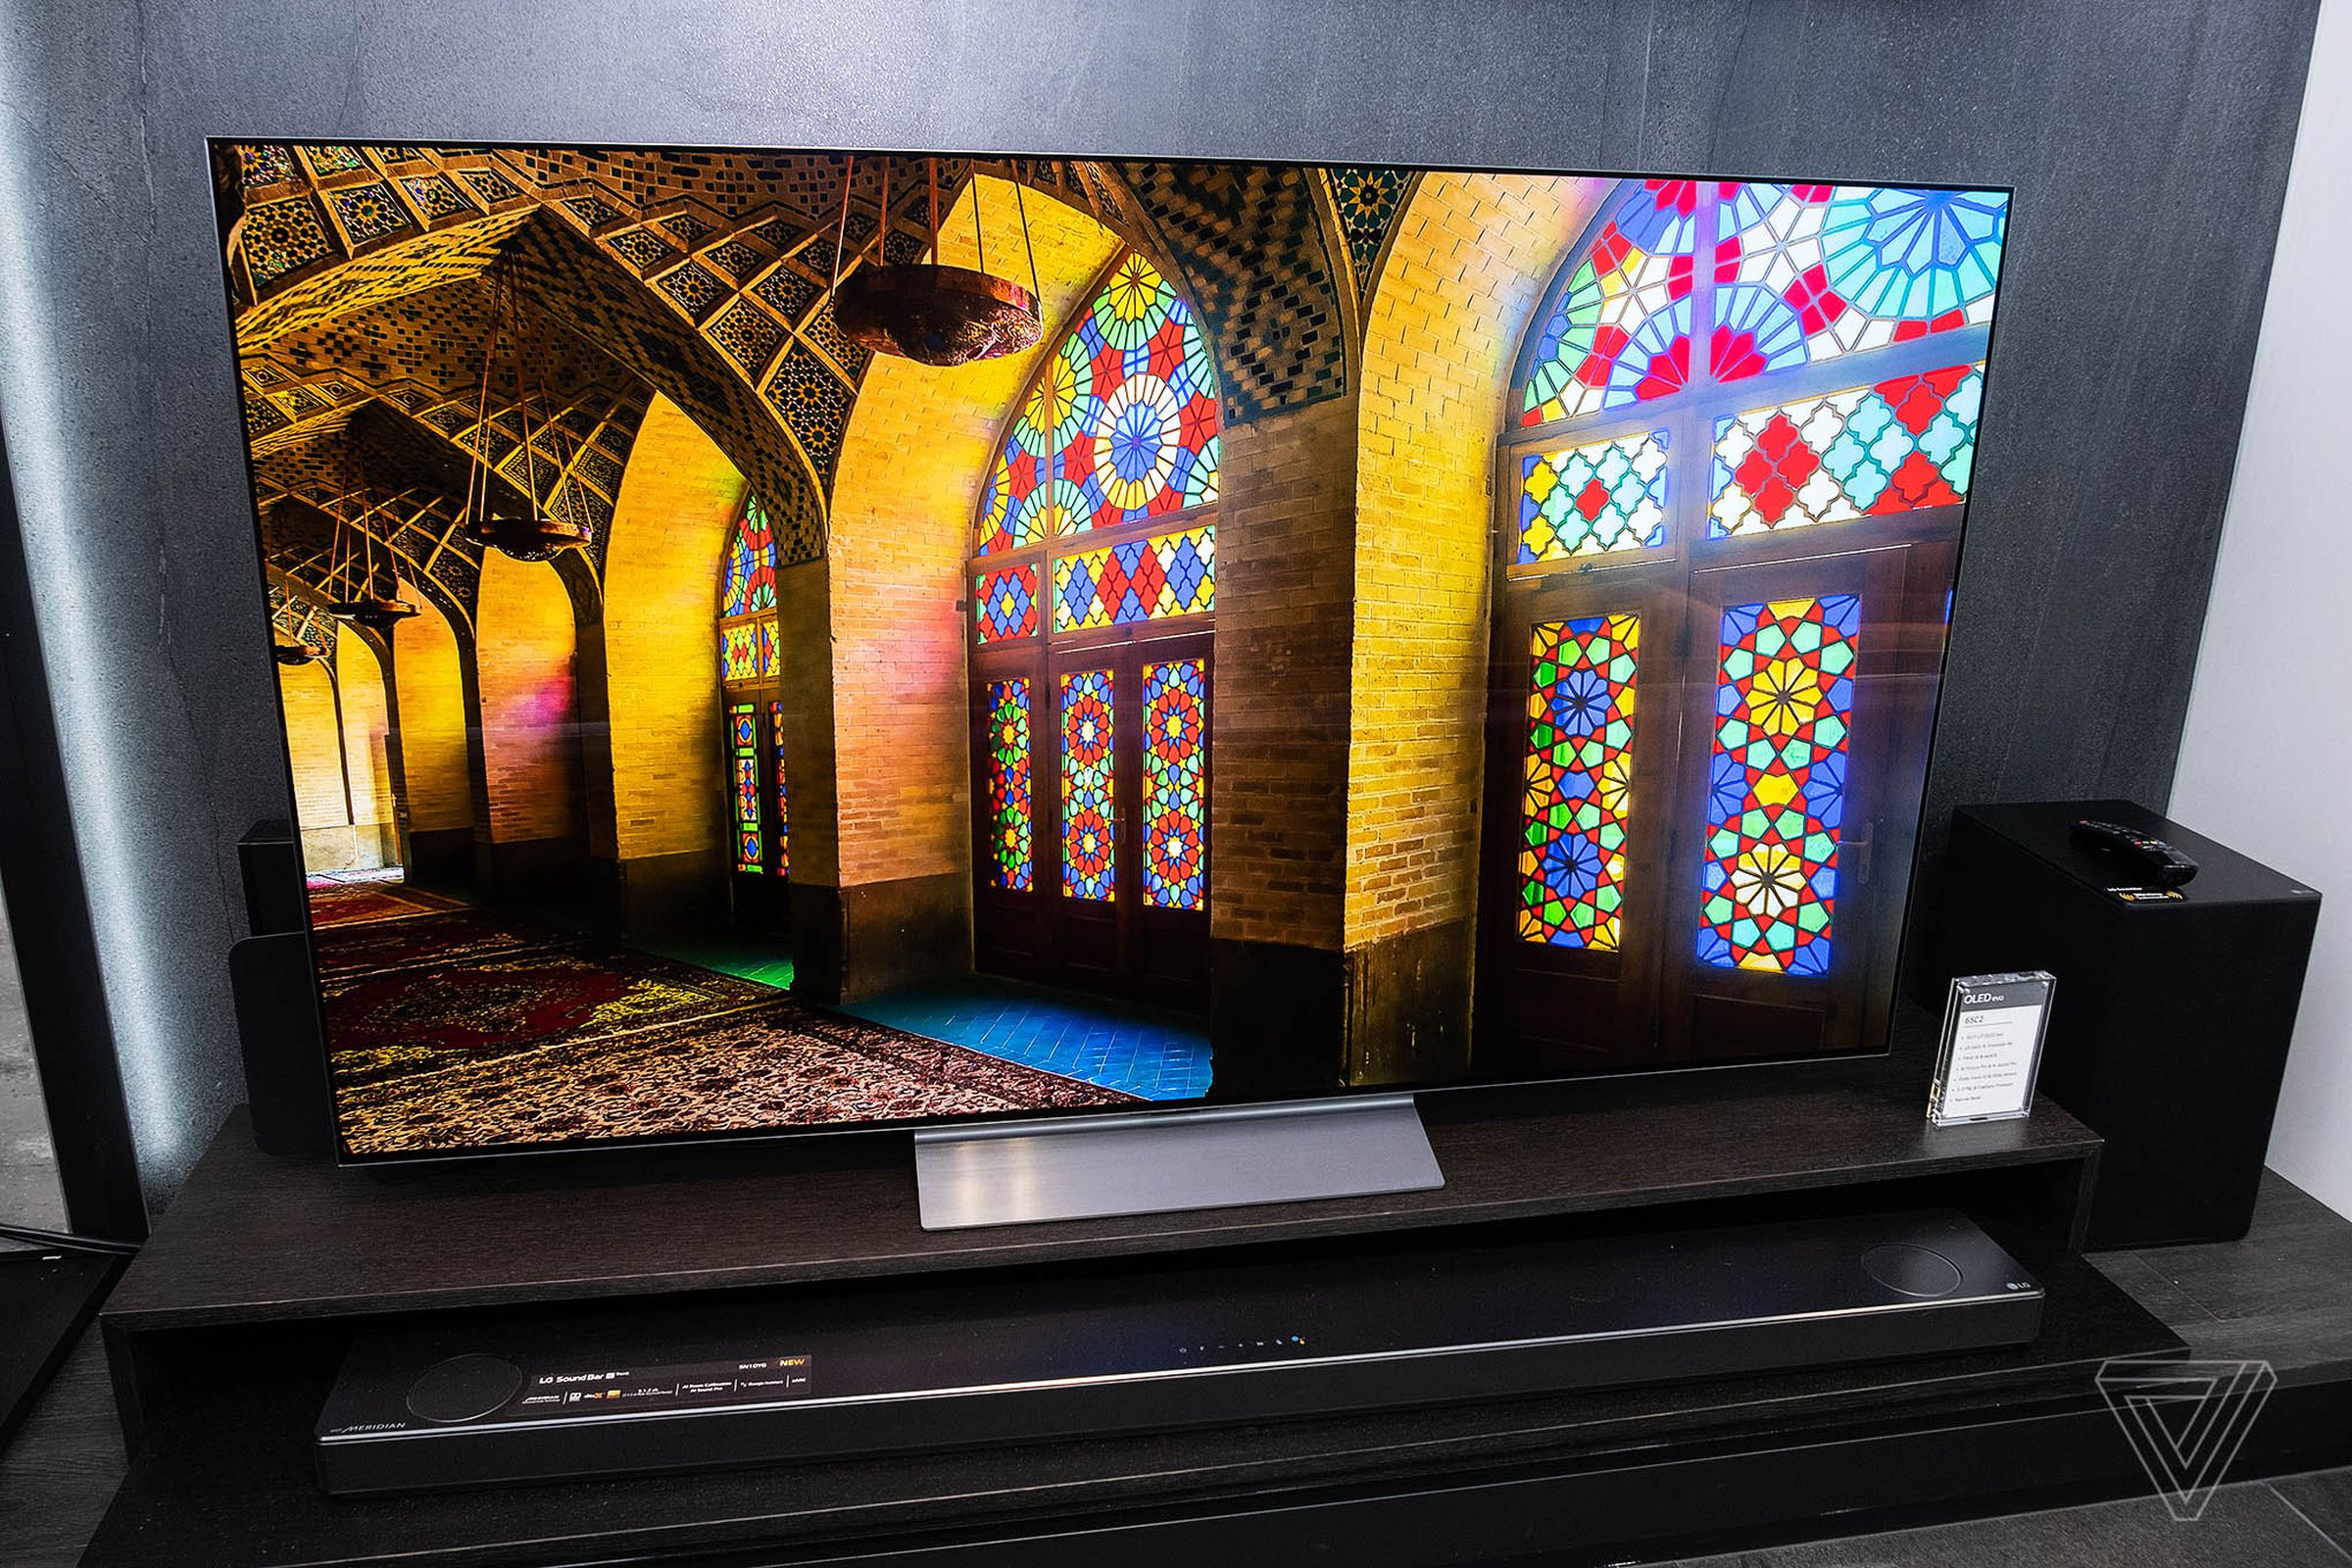 An LG C2 OLED television displays the colorful interior of a building with stained glass.